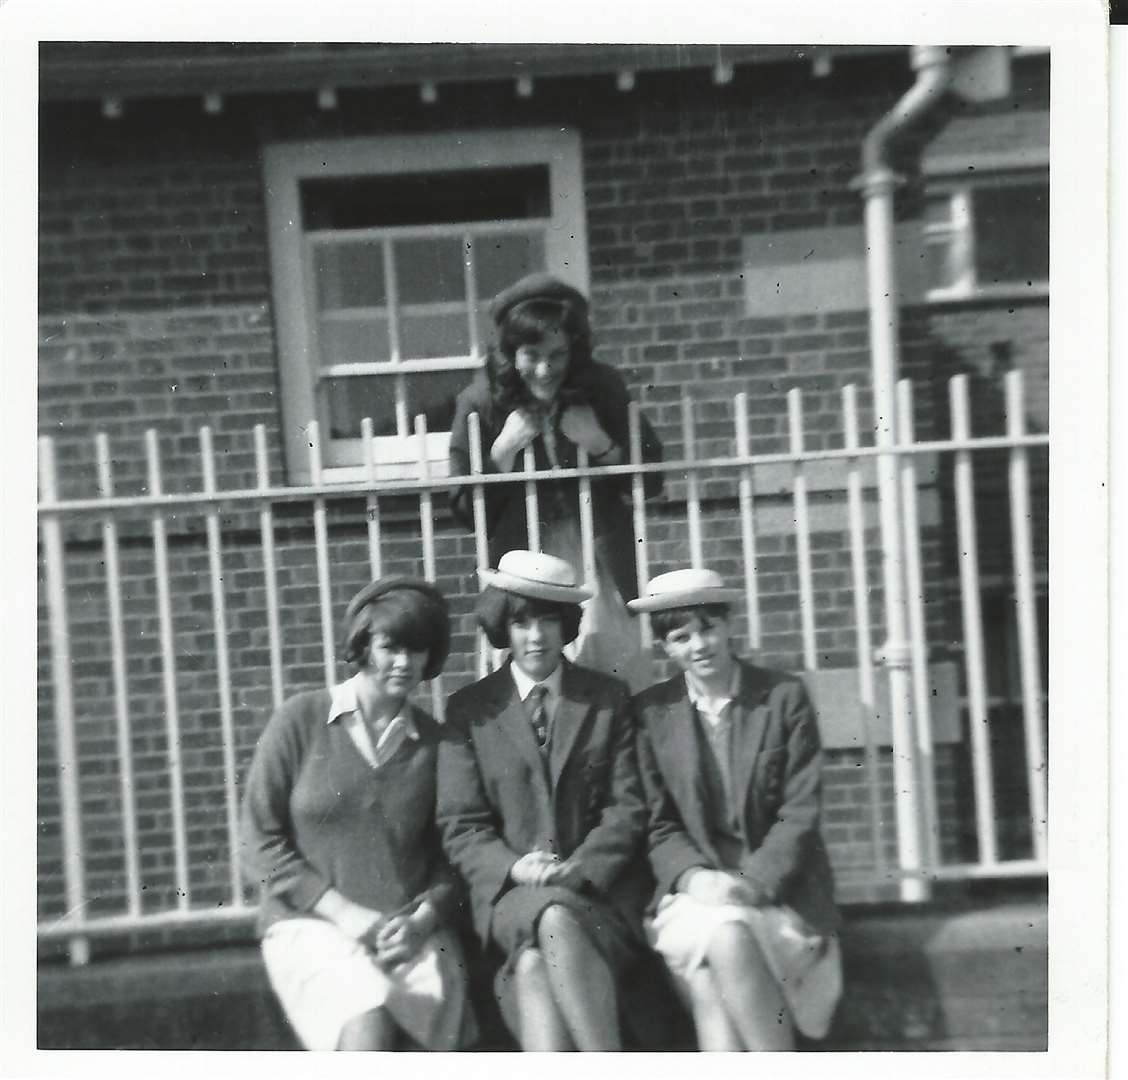 Back - Helen Reid. Front, left to right, Jane Turk, Jean Riley, Lois.Dyer outside the school changing rooms in 1964. Two are wearing the "awful" winter grey felt hats, two with summer boaters